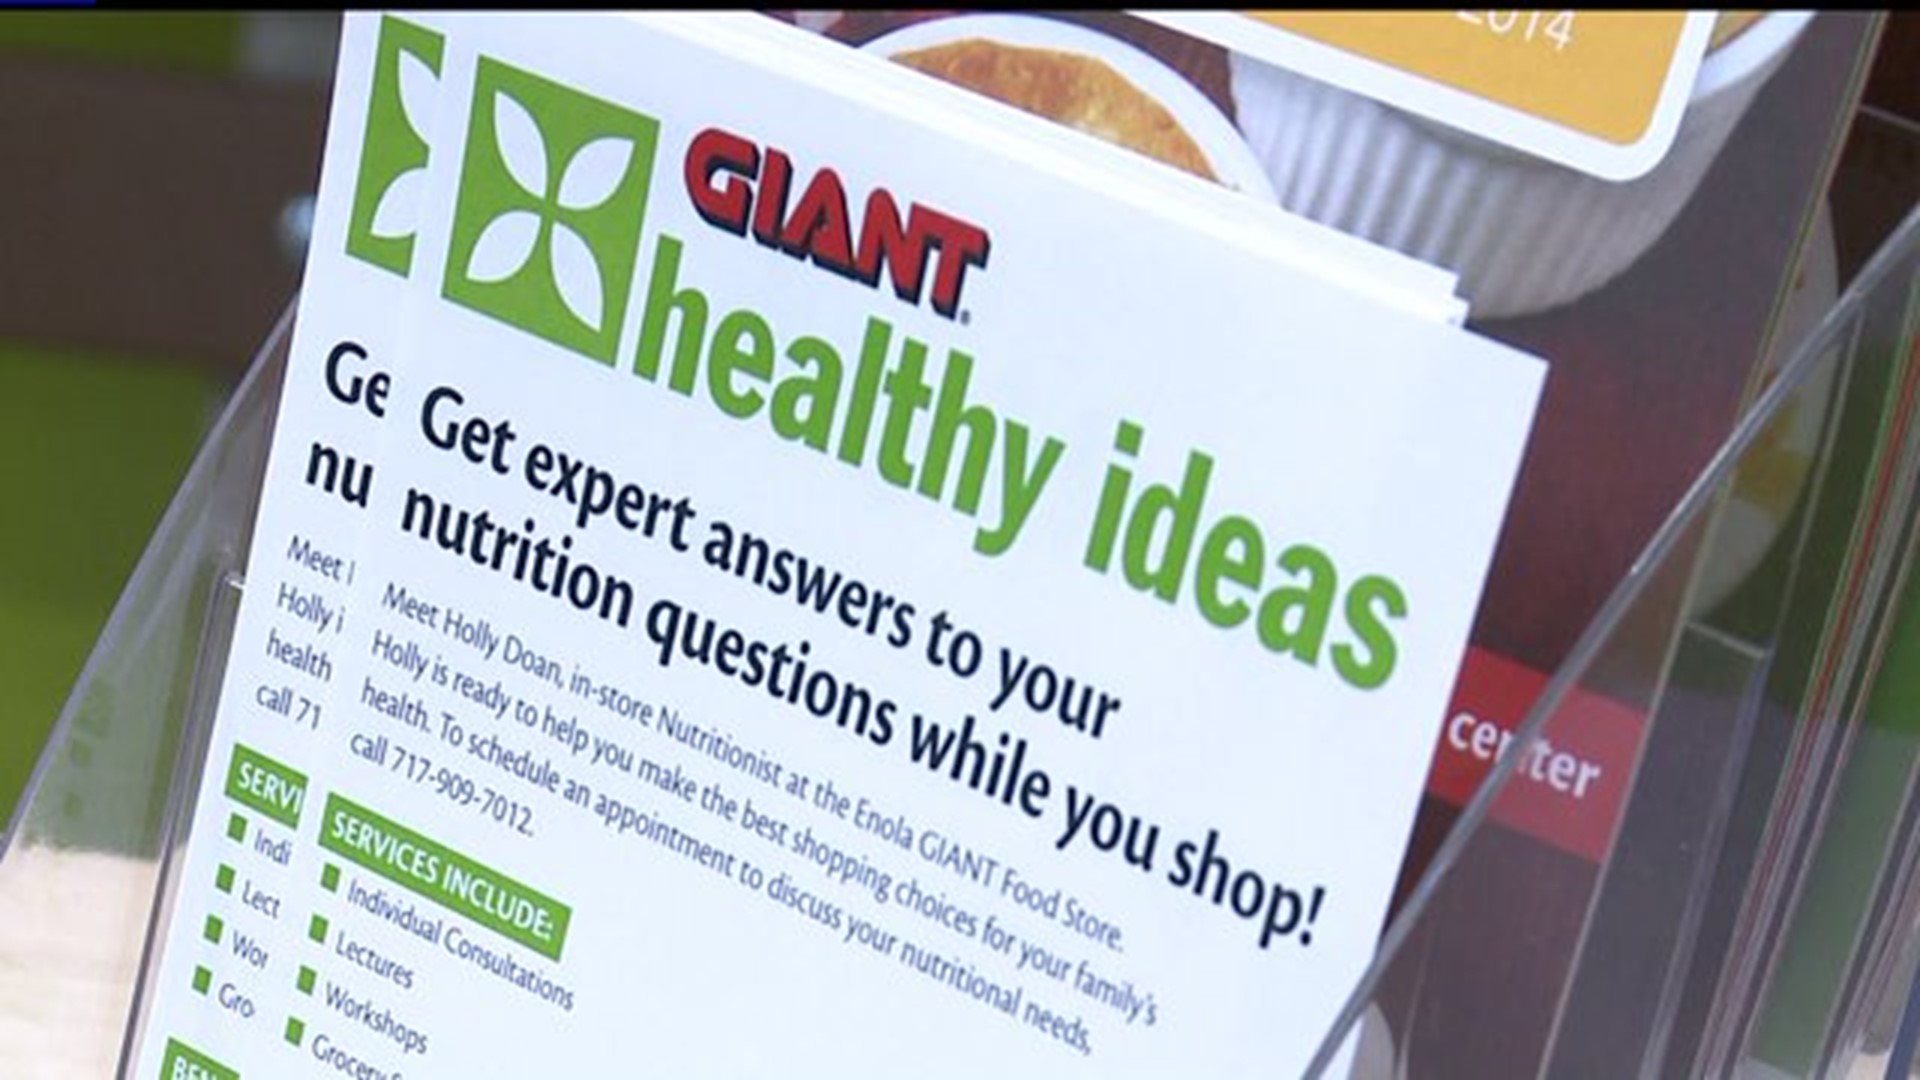 Giant Food Stores: In store nutritionist program